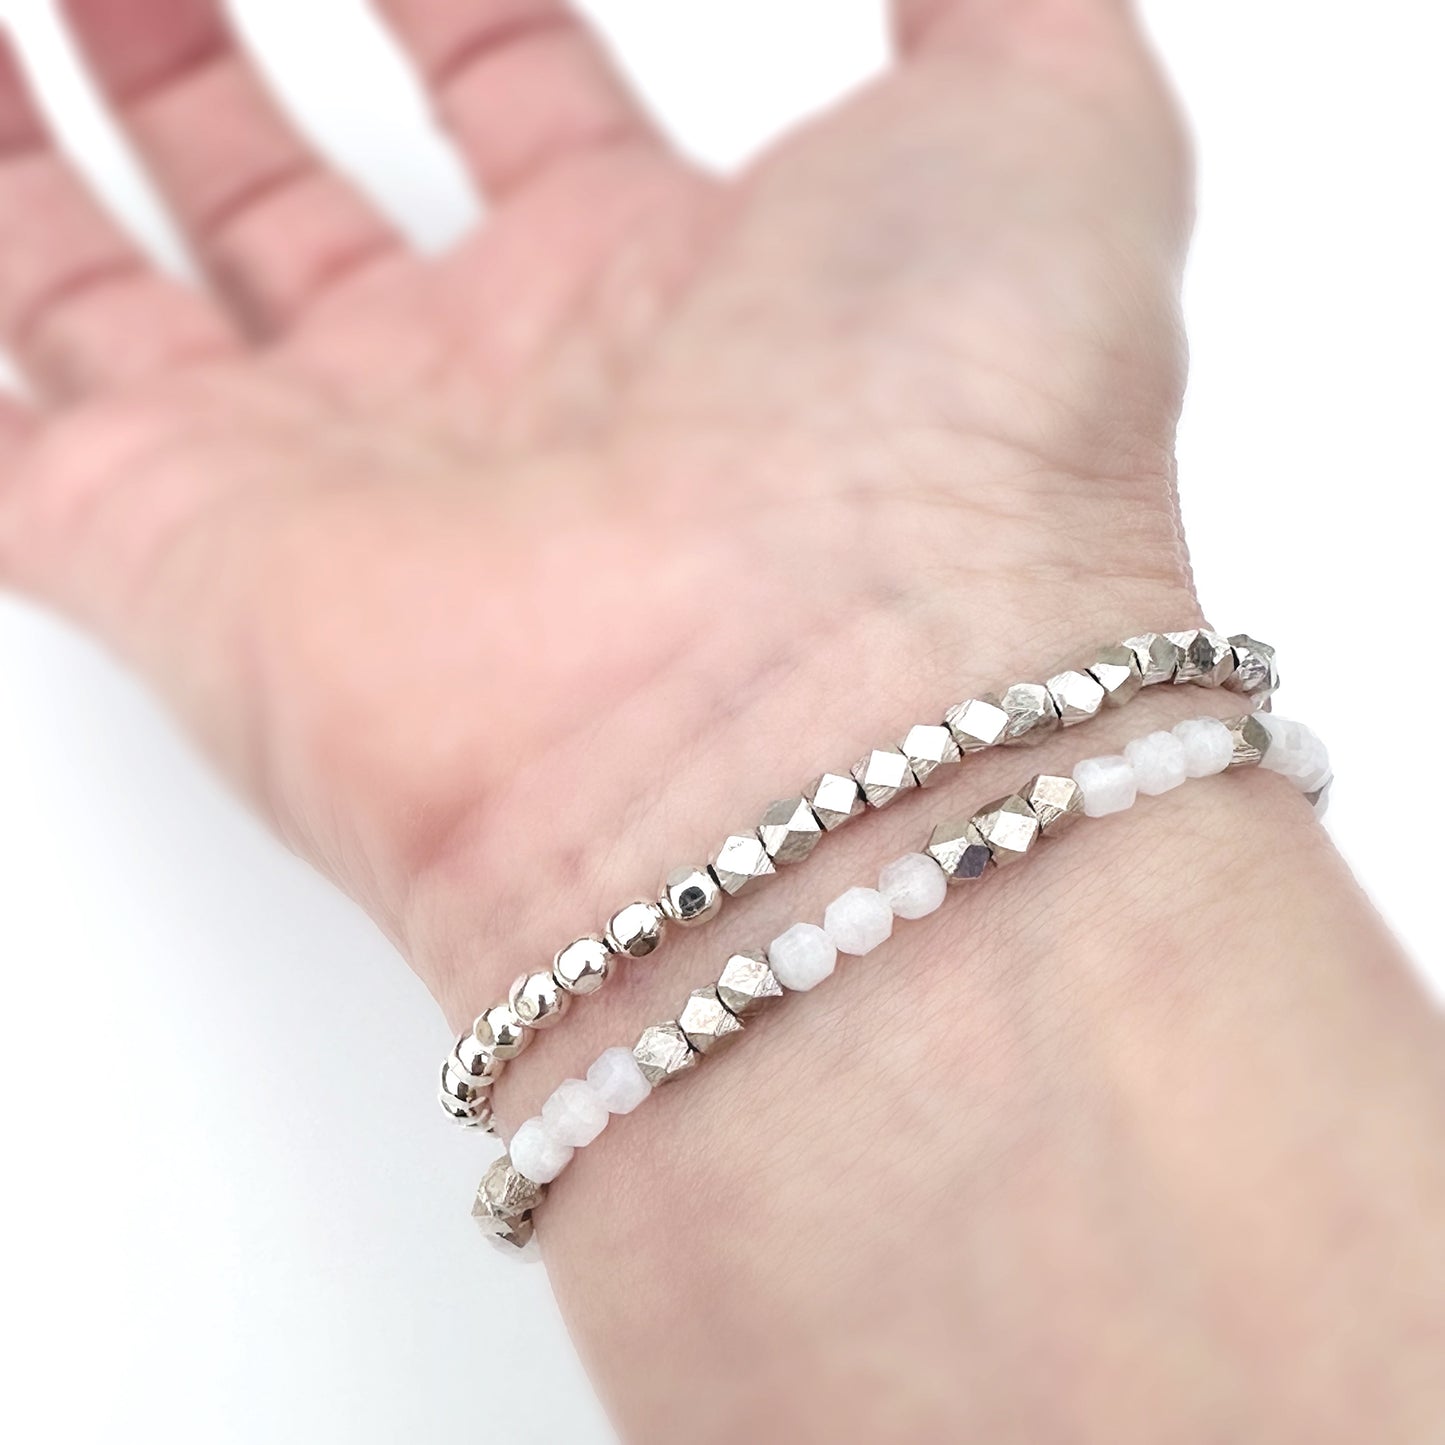 sterling silver stacking bracelet with white and silver stacking bracelet on wrist